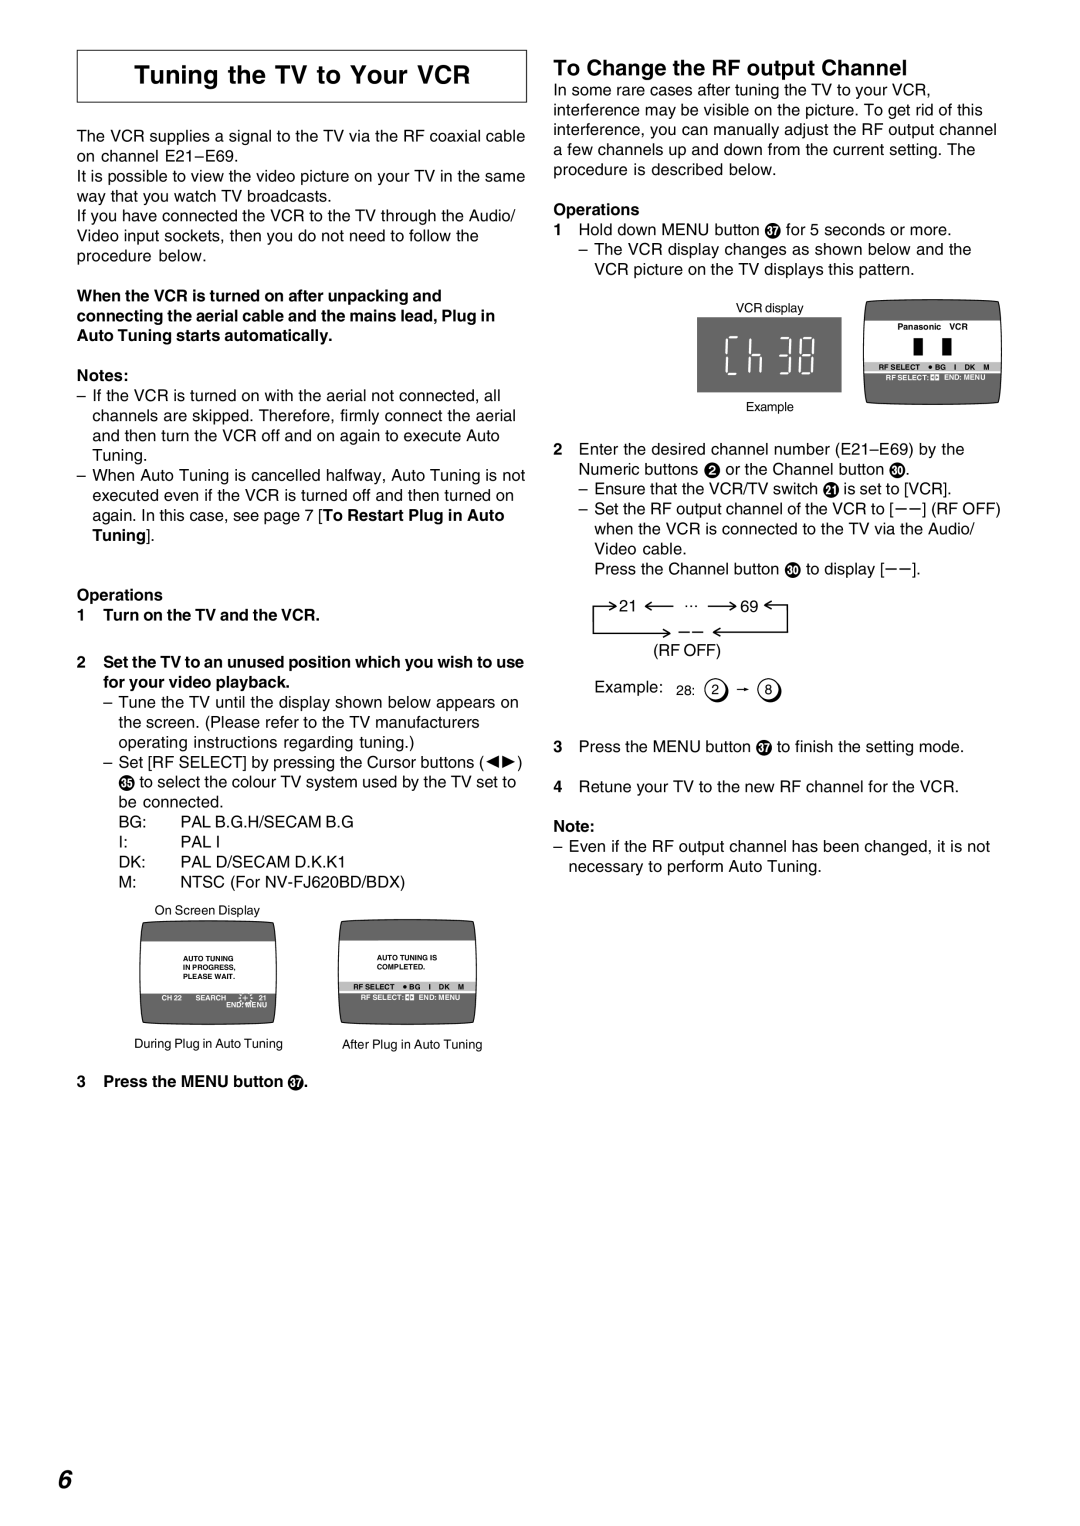 Panasonic NV-FJ625AM, NV-FJ620 specifications Tuning the TV to Your VCR, To Change the RF output Channel 